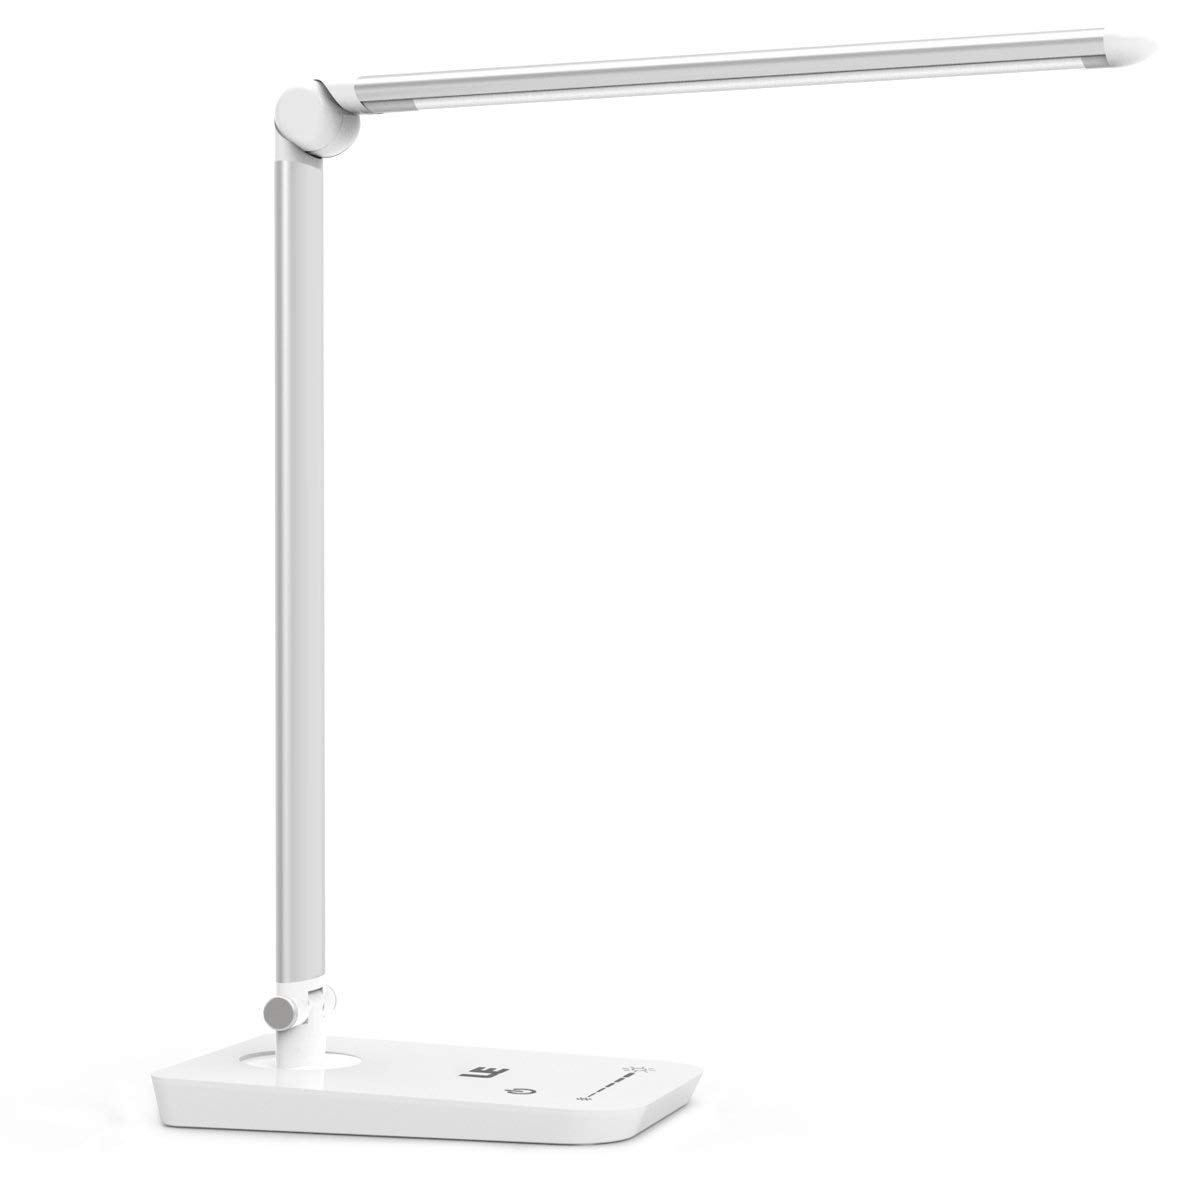 Le 8w Daylight Desk Lamp Dimmable 7 Level Brightness Led throughout sizing 1200 X 1200